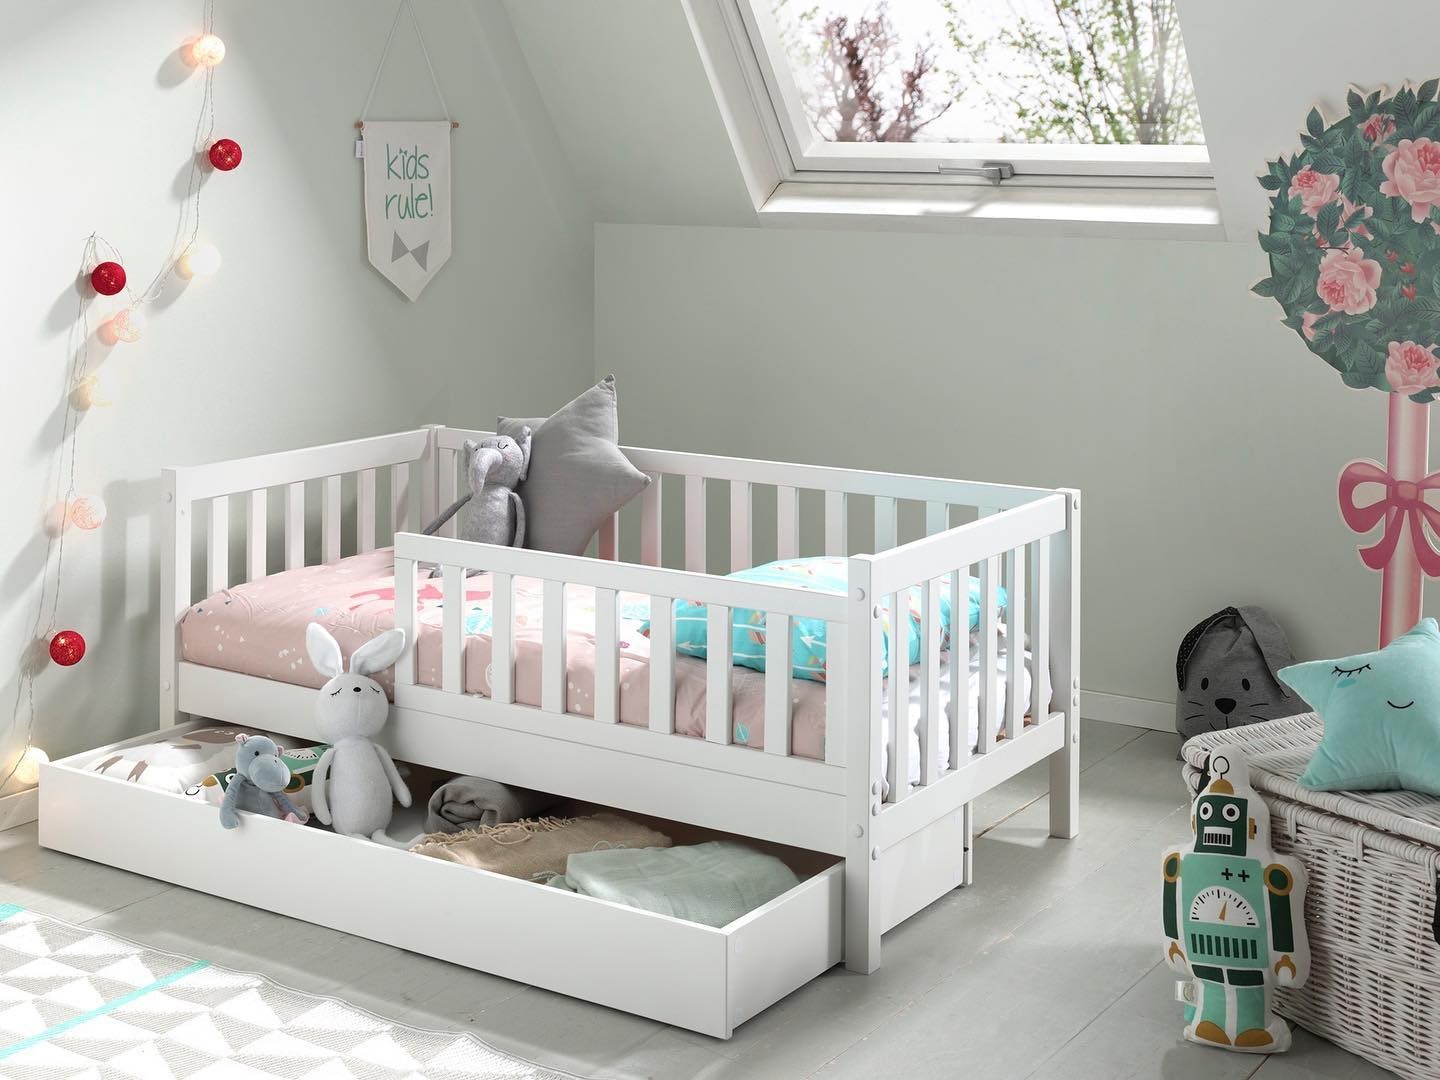 THE TODDLER KID'S BED